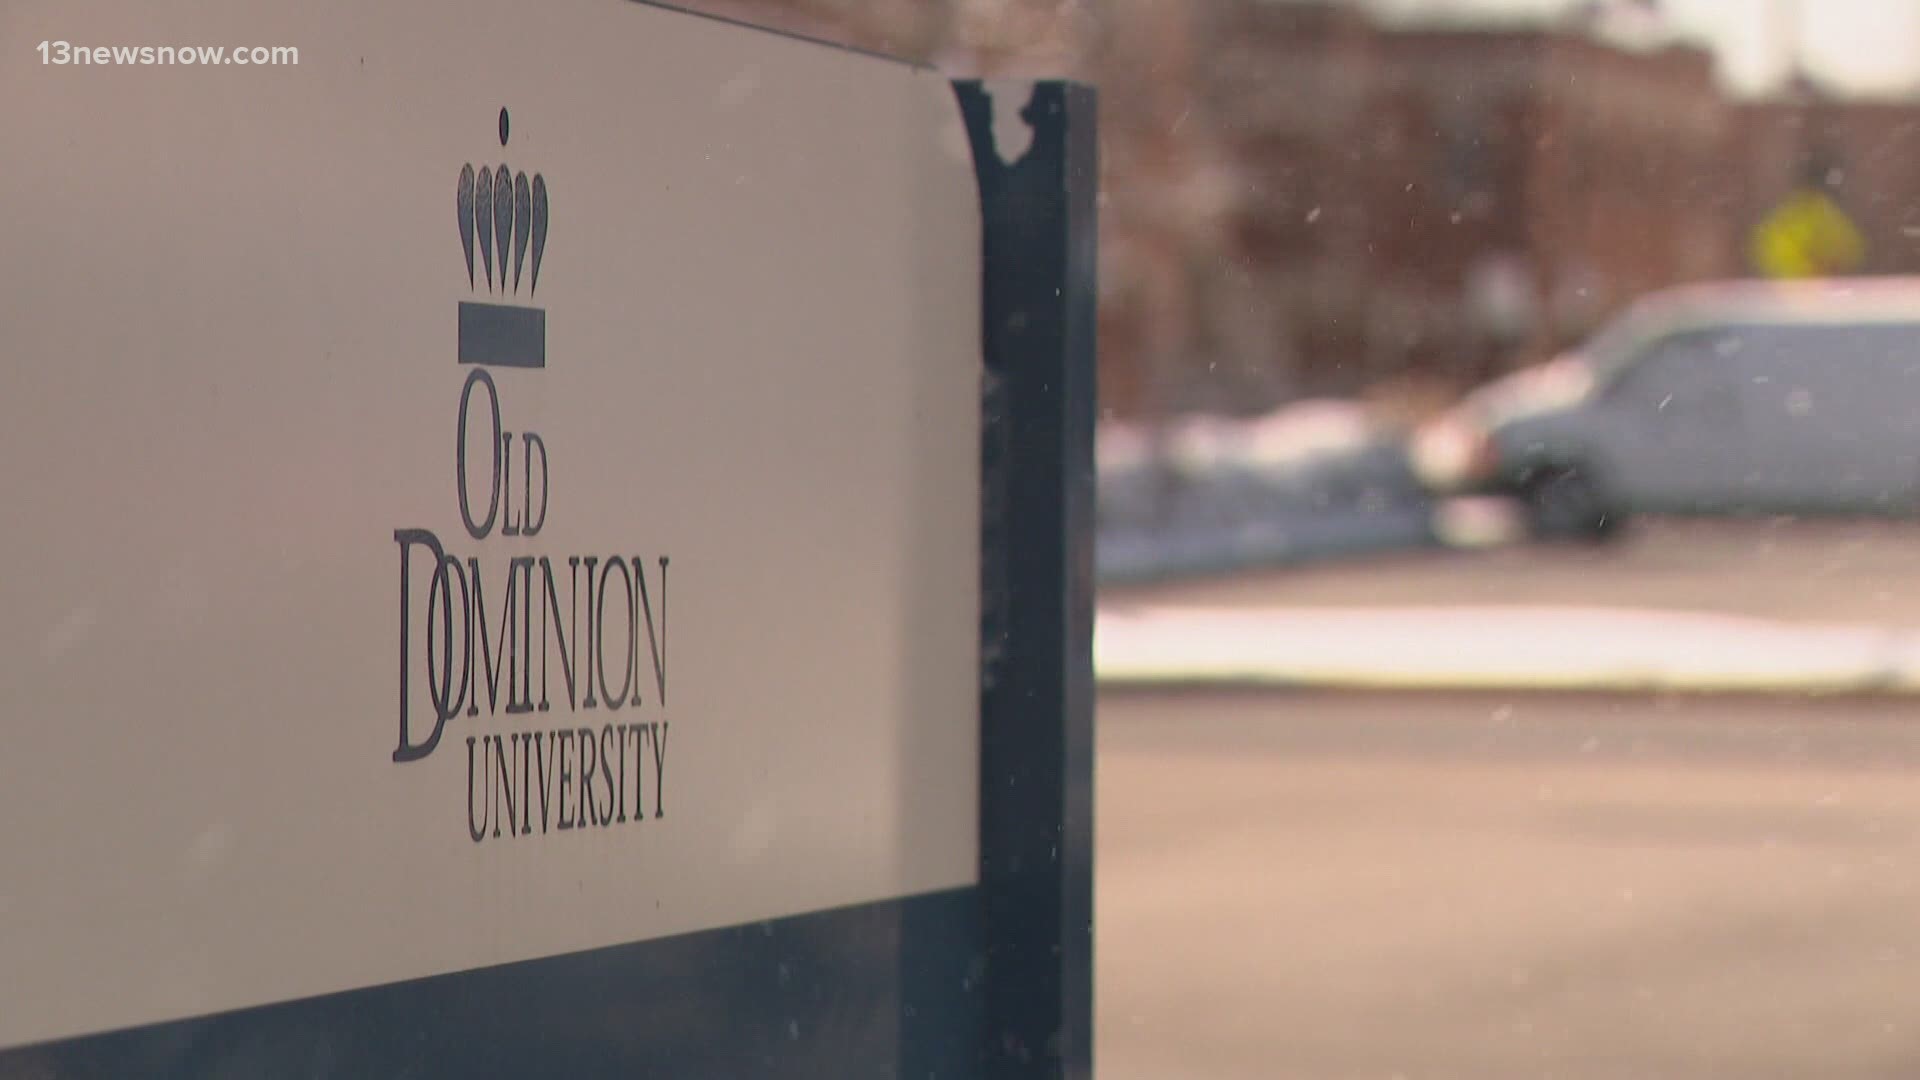 The university said it will be a gradual process and more students will move back into the classroom on Feb. 15.